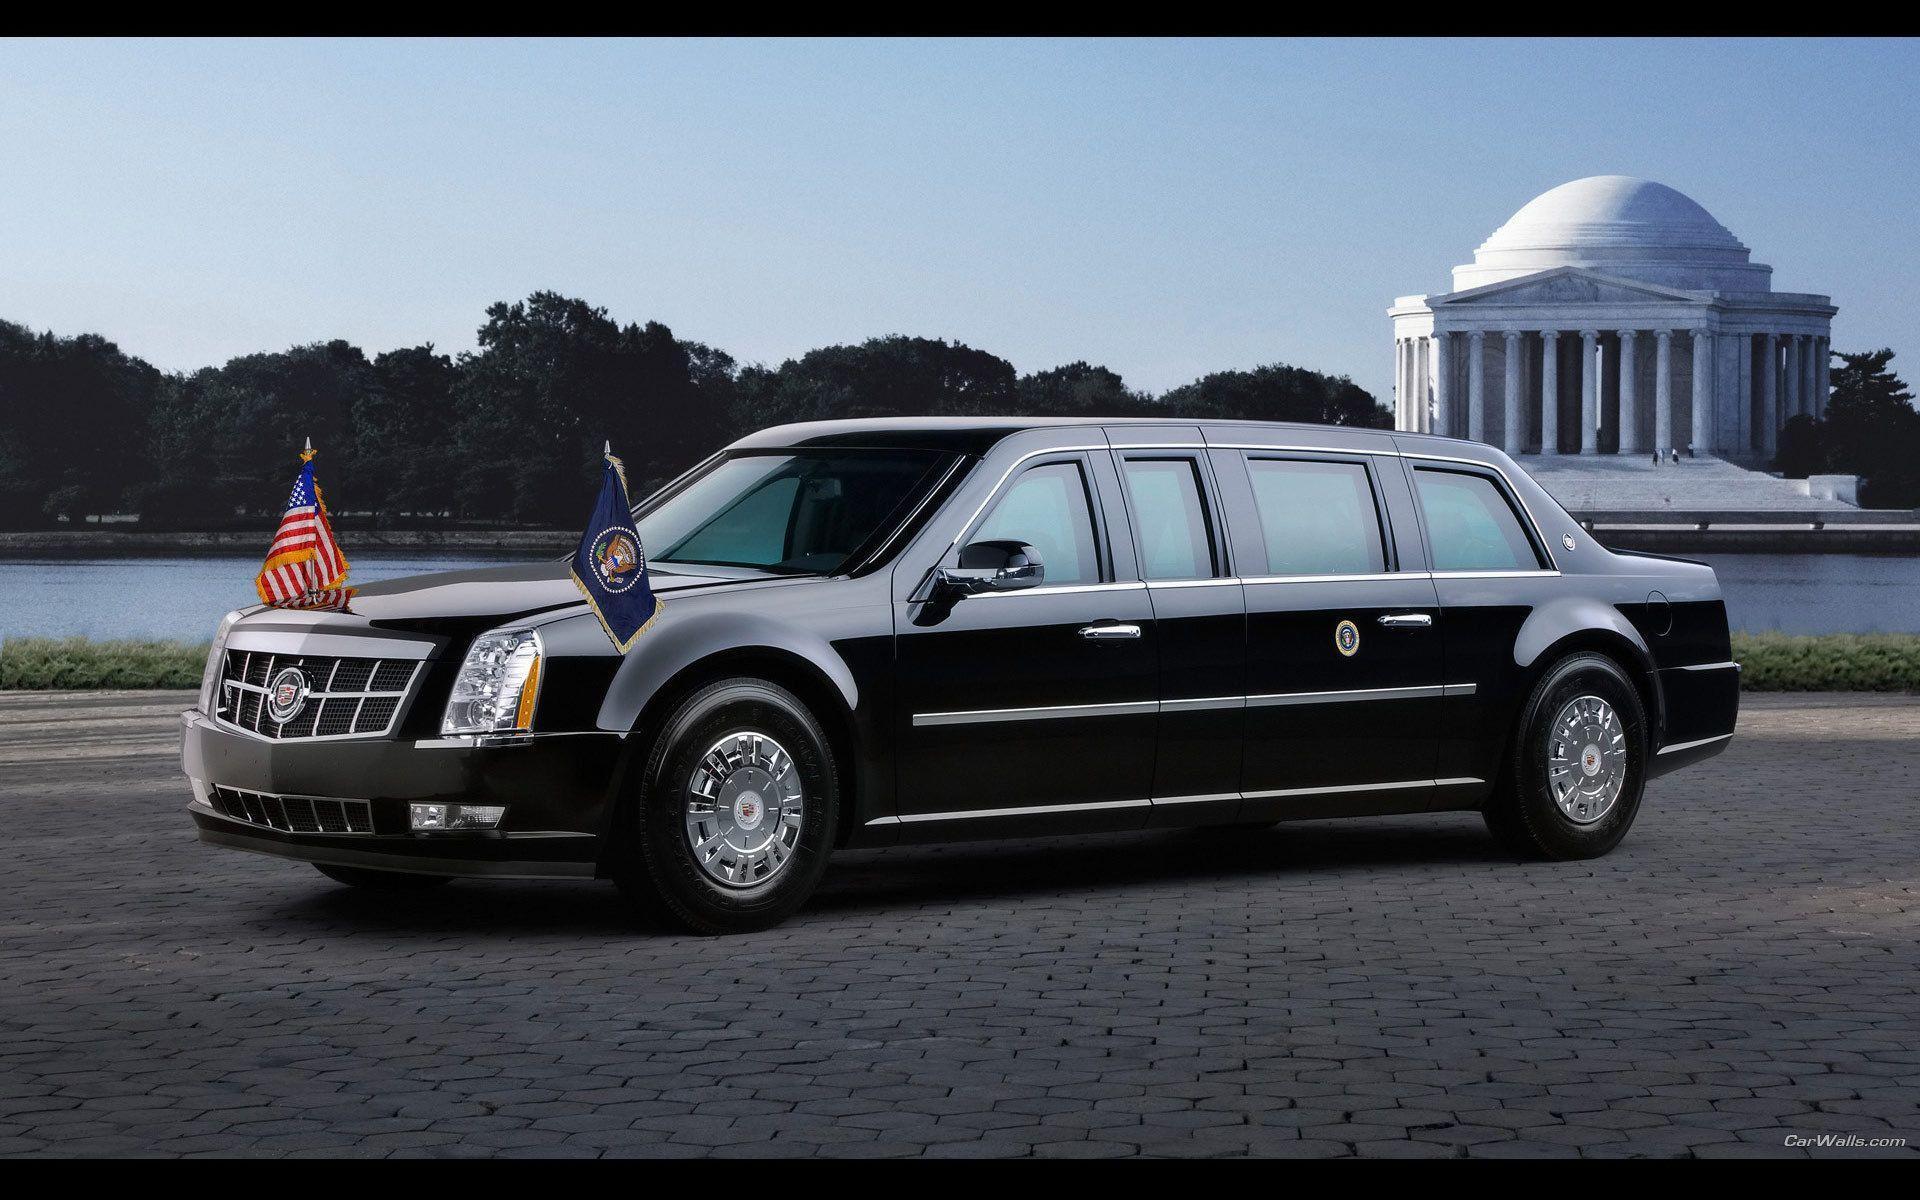 Black Cadillac for the government wallpaper and image